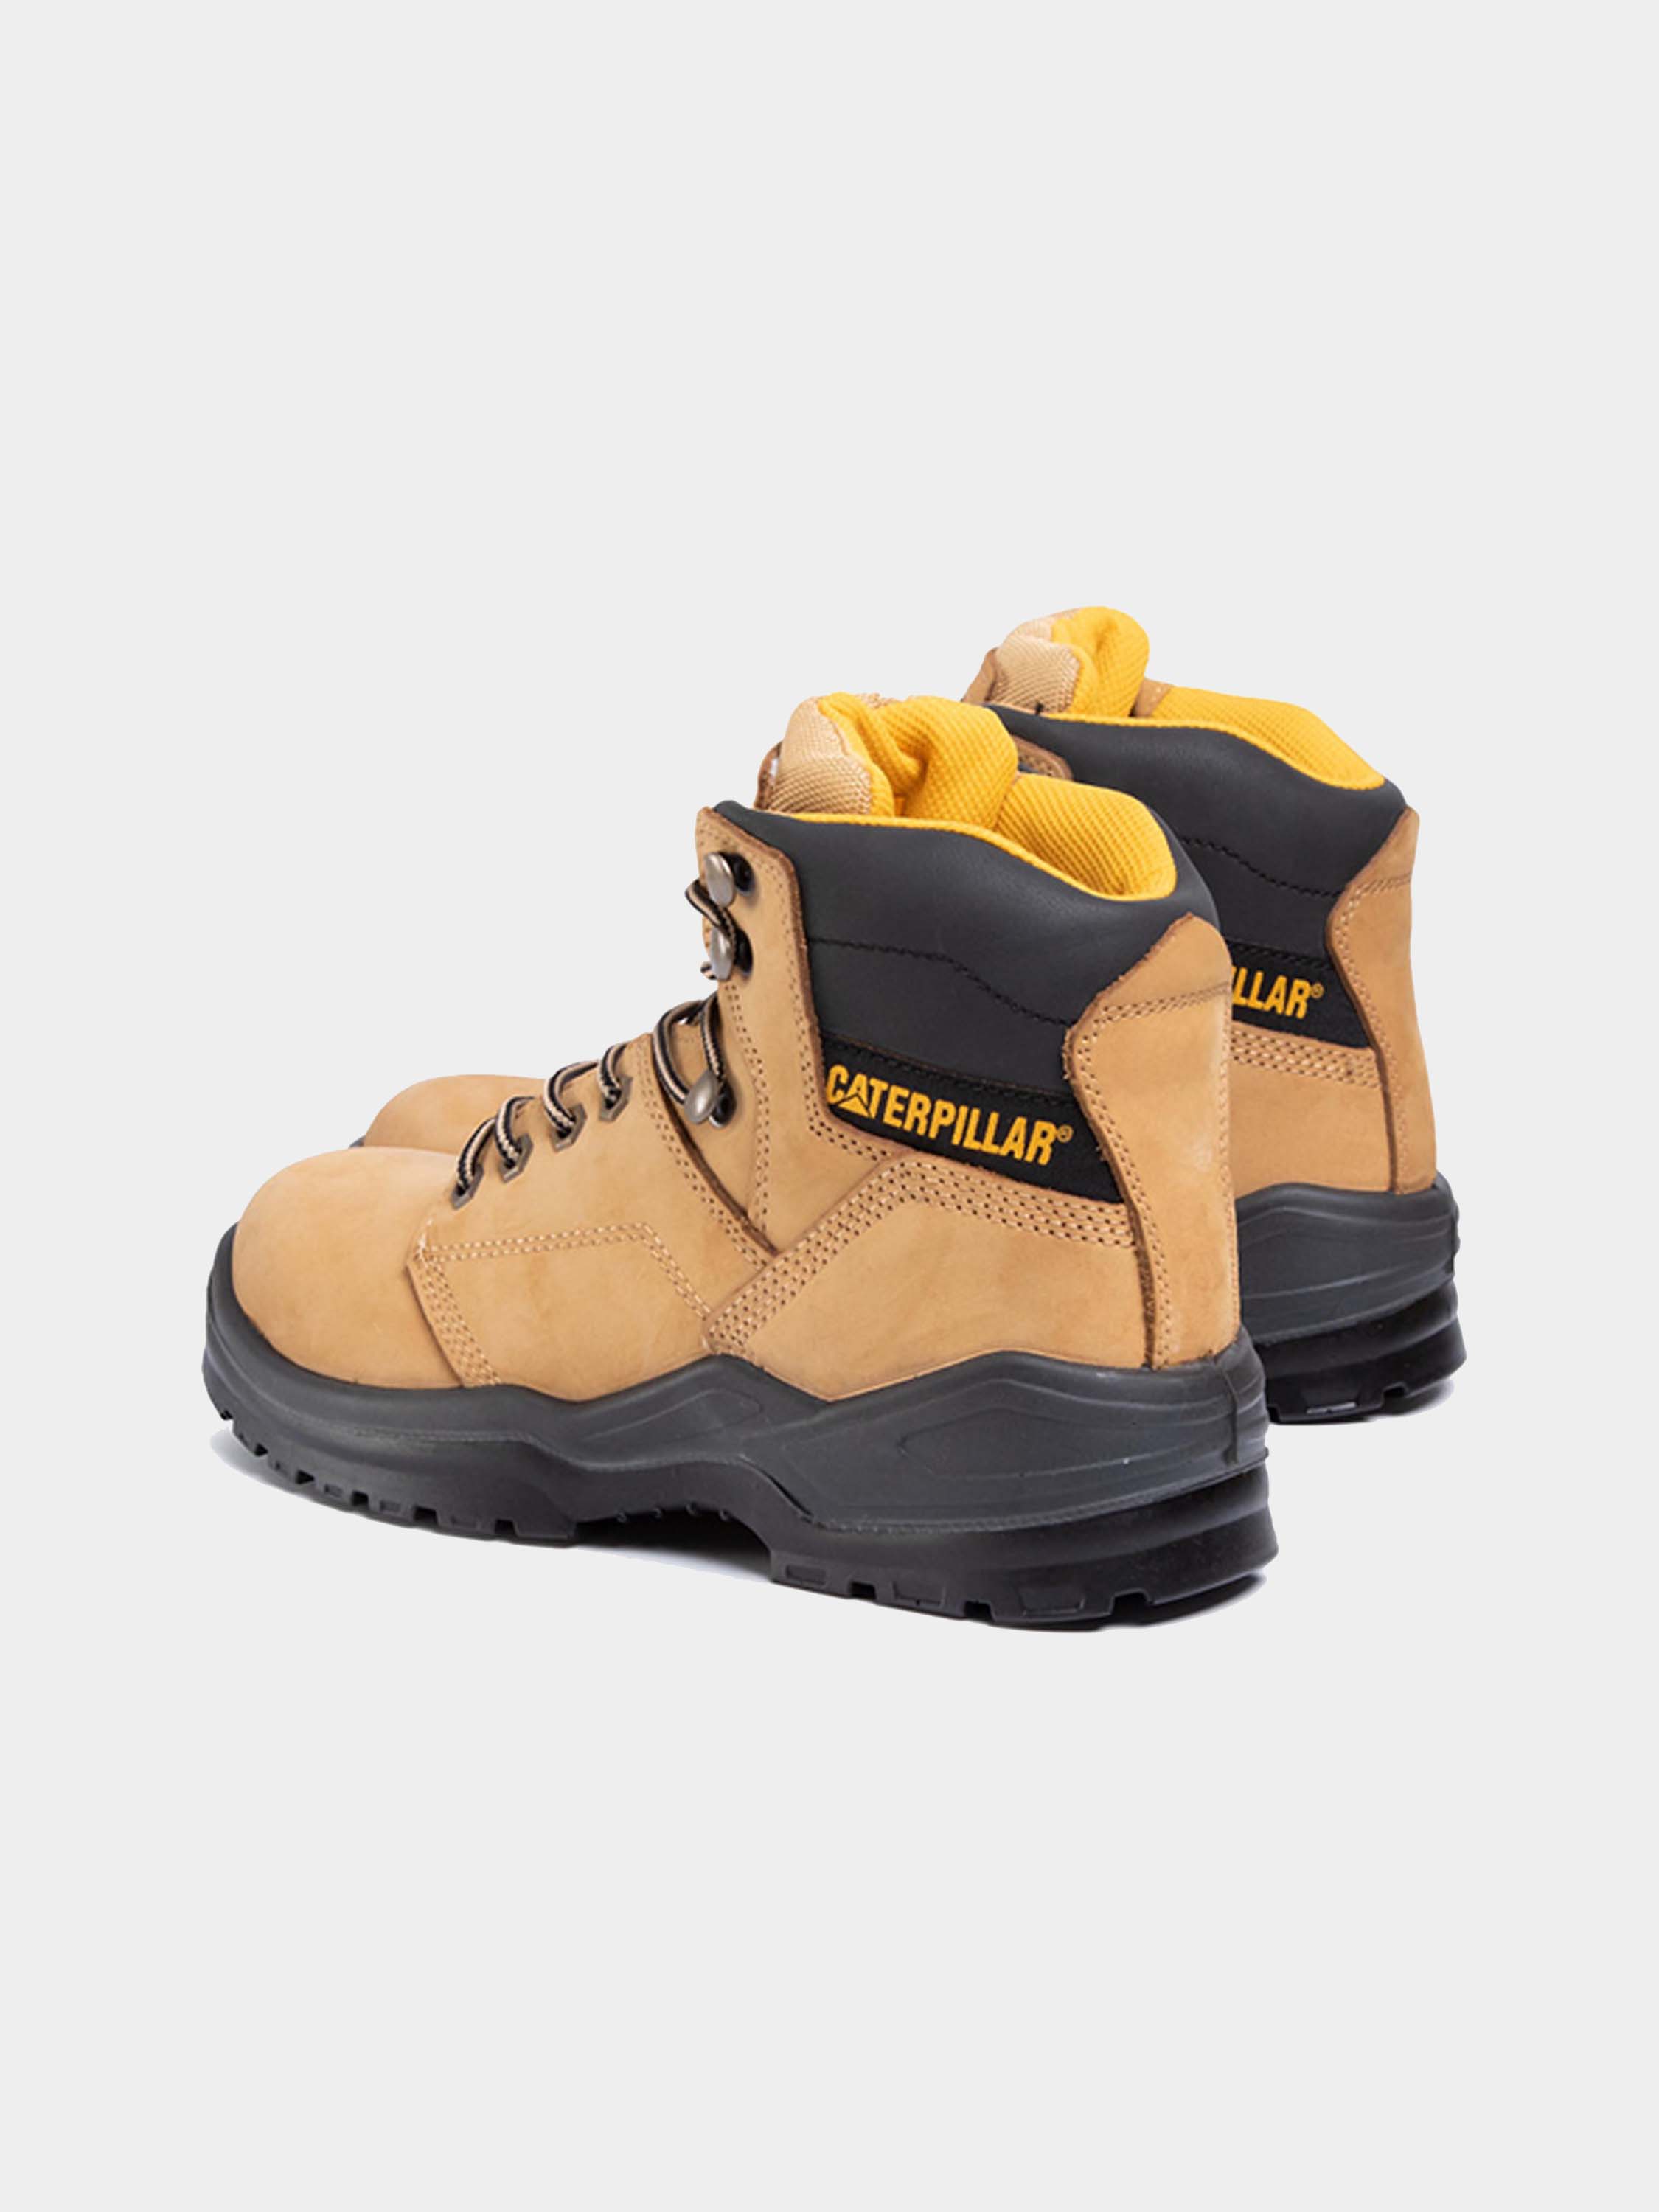 Caterpillar Men's Striver ST S3 SRC Safety Boot #color_Yellow